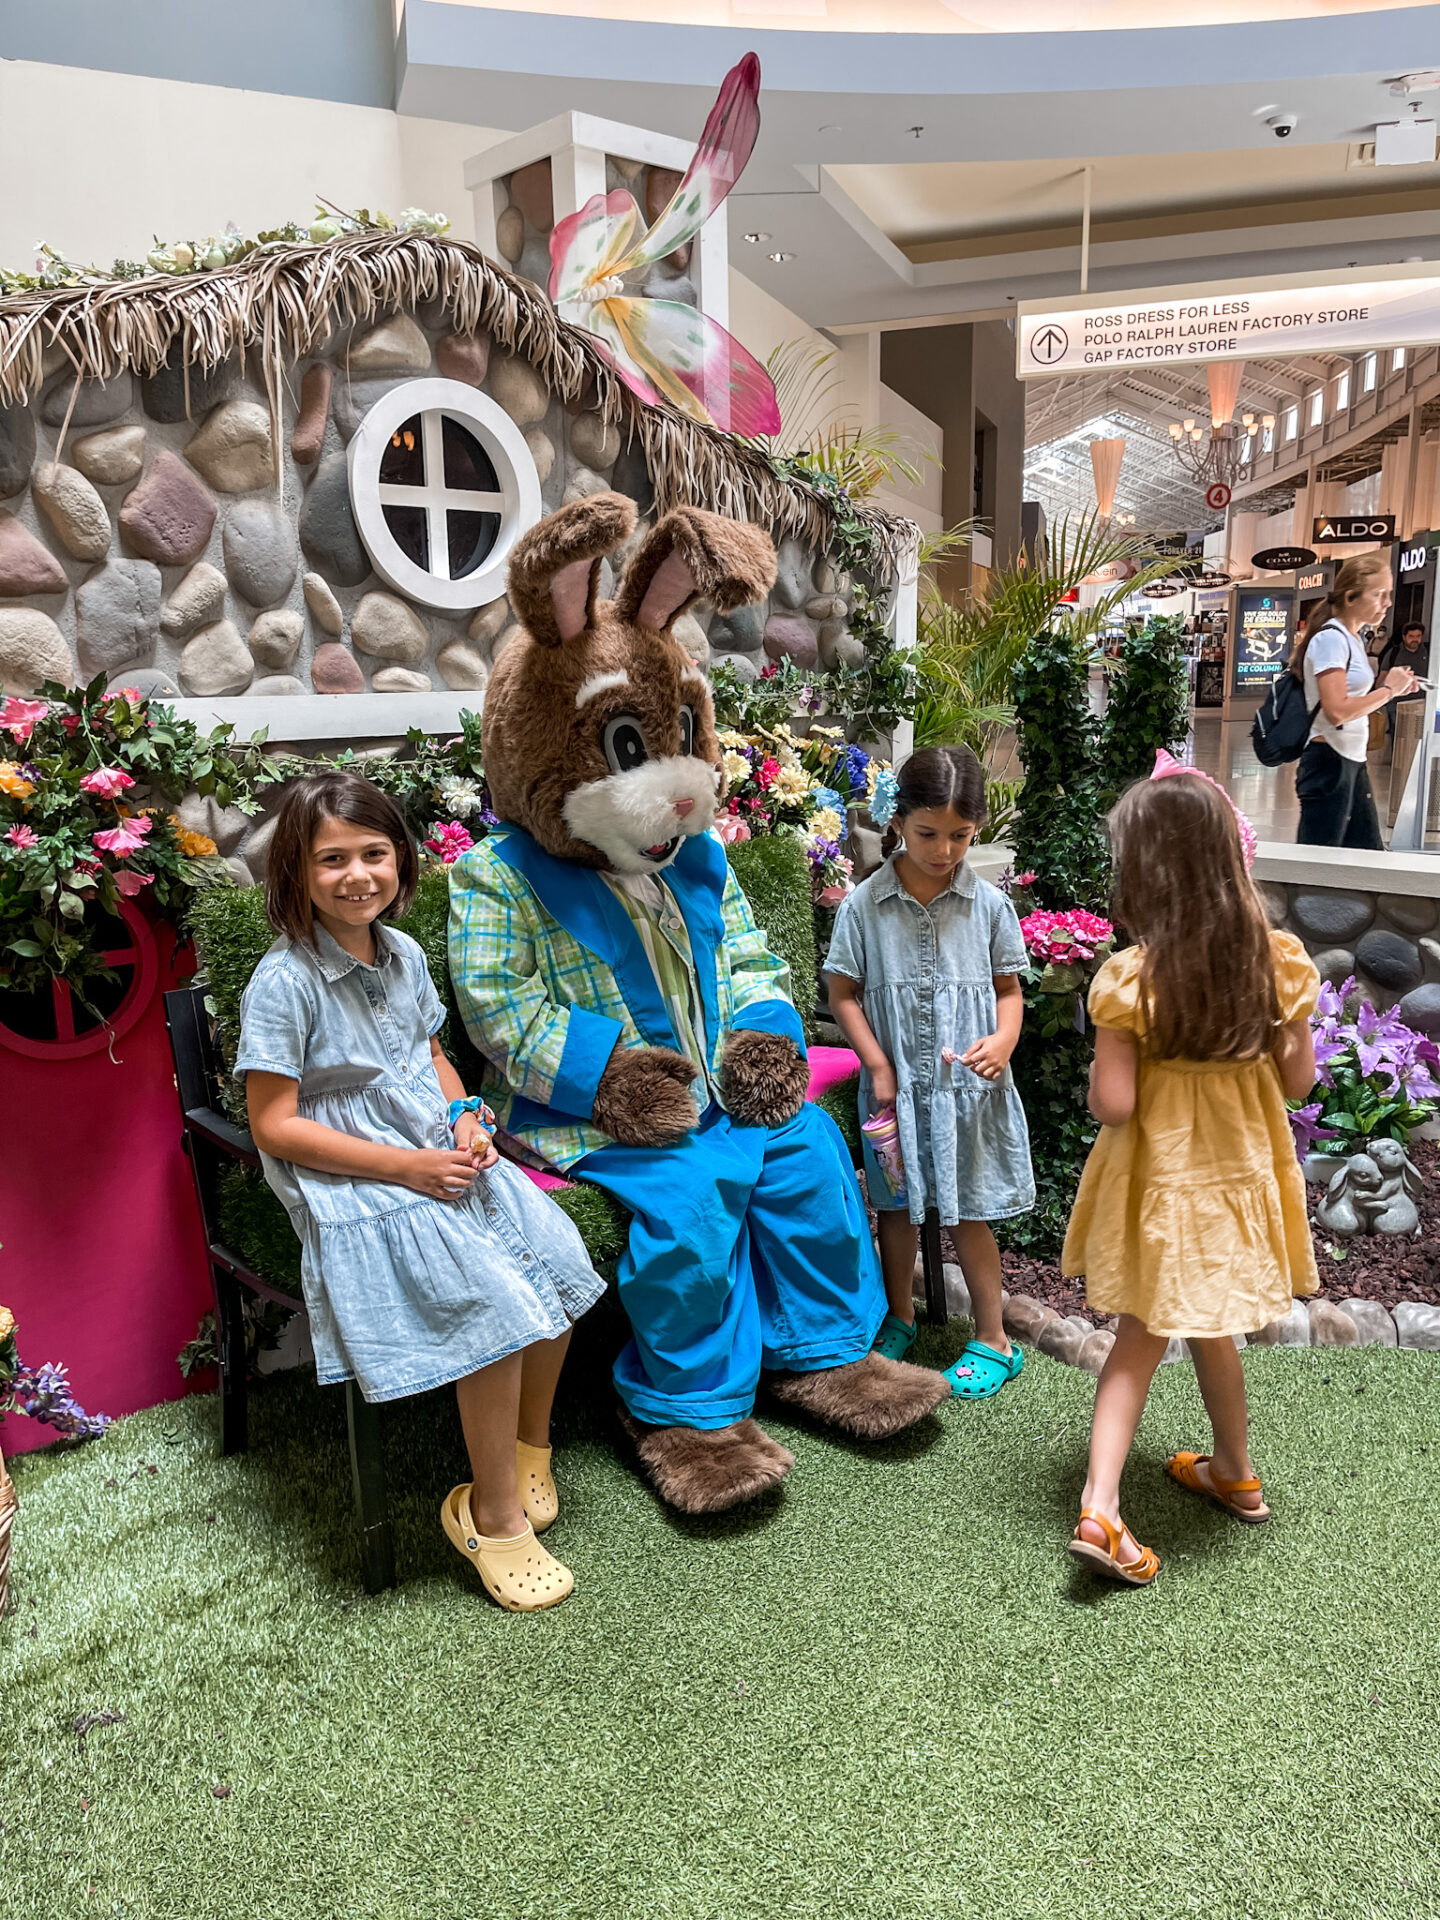 Dolphin Mall Celebrates Easter with Family-Friendly Activities - 305 Hive